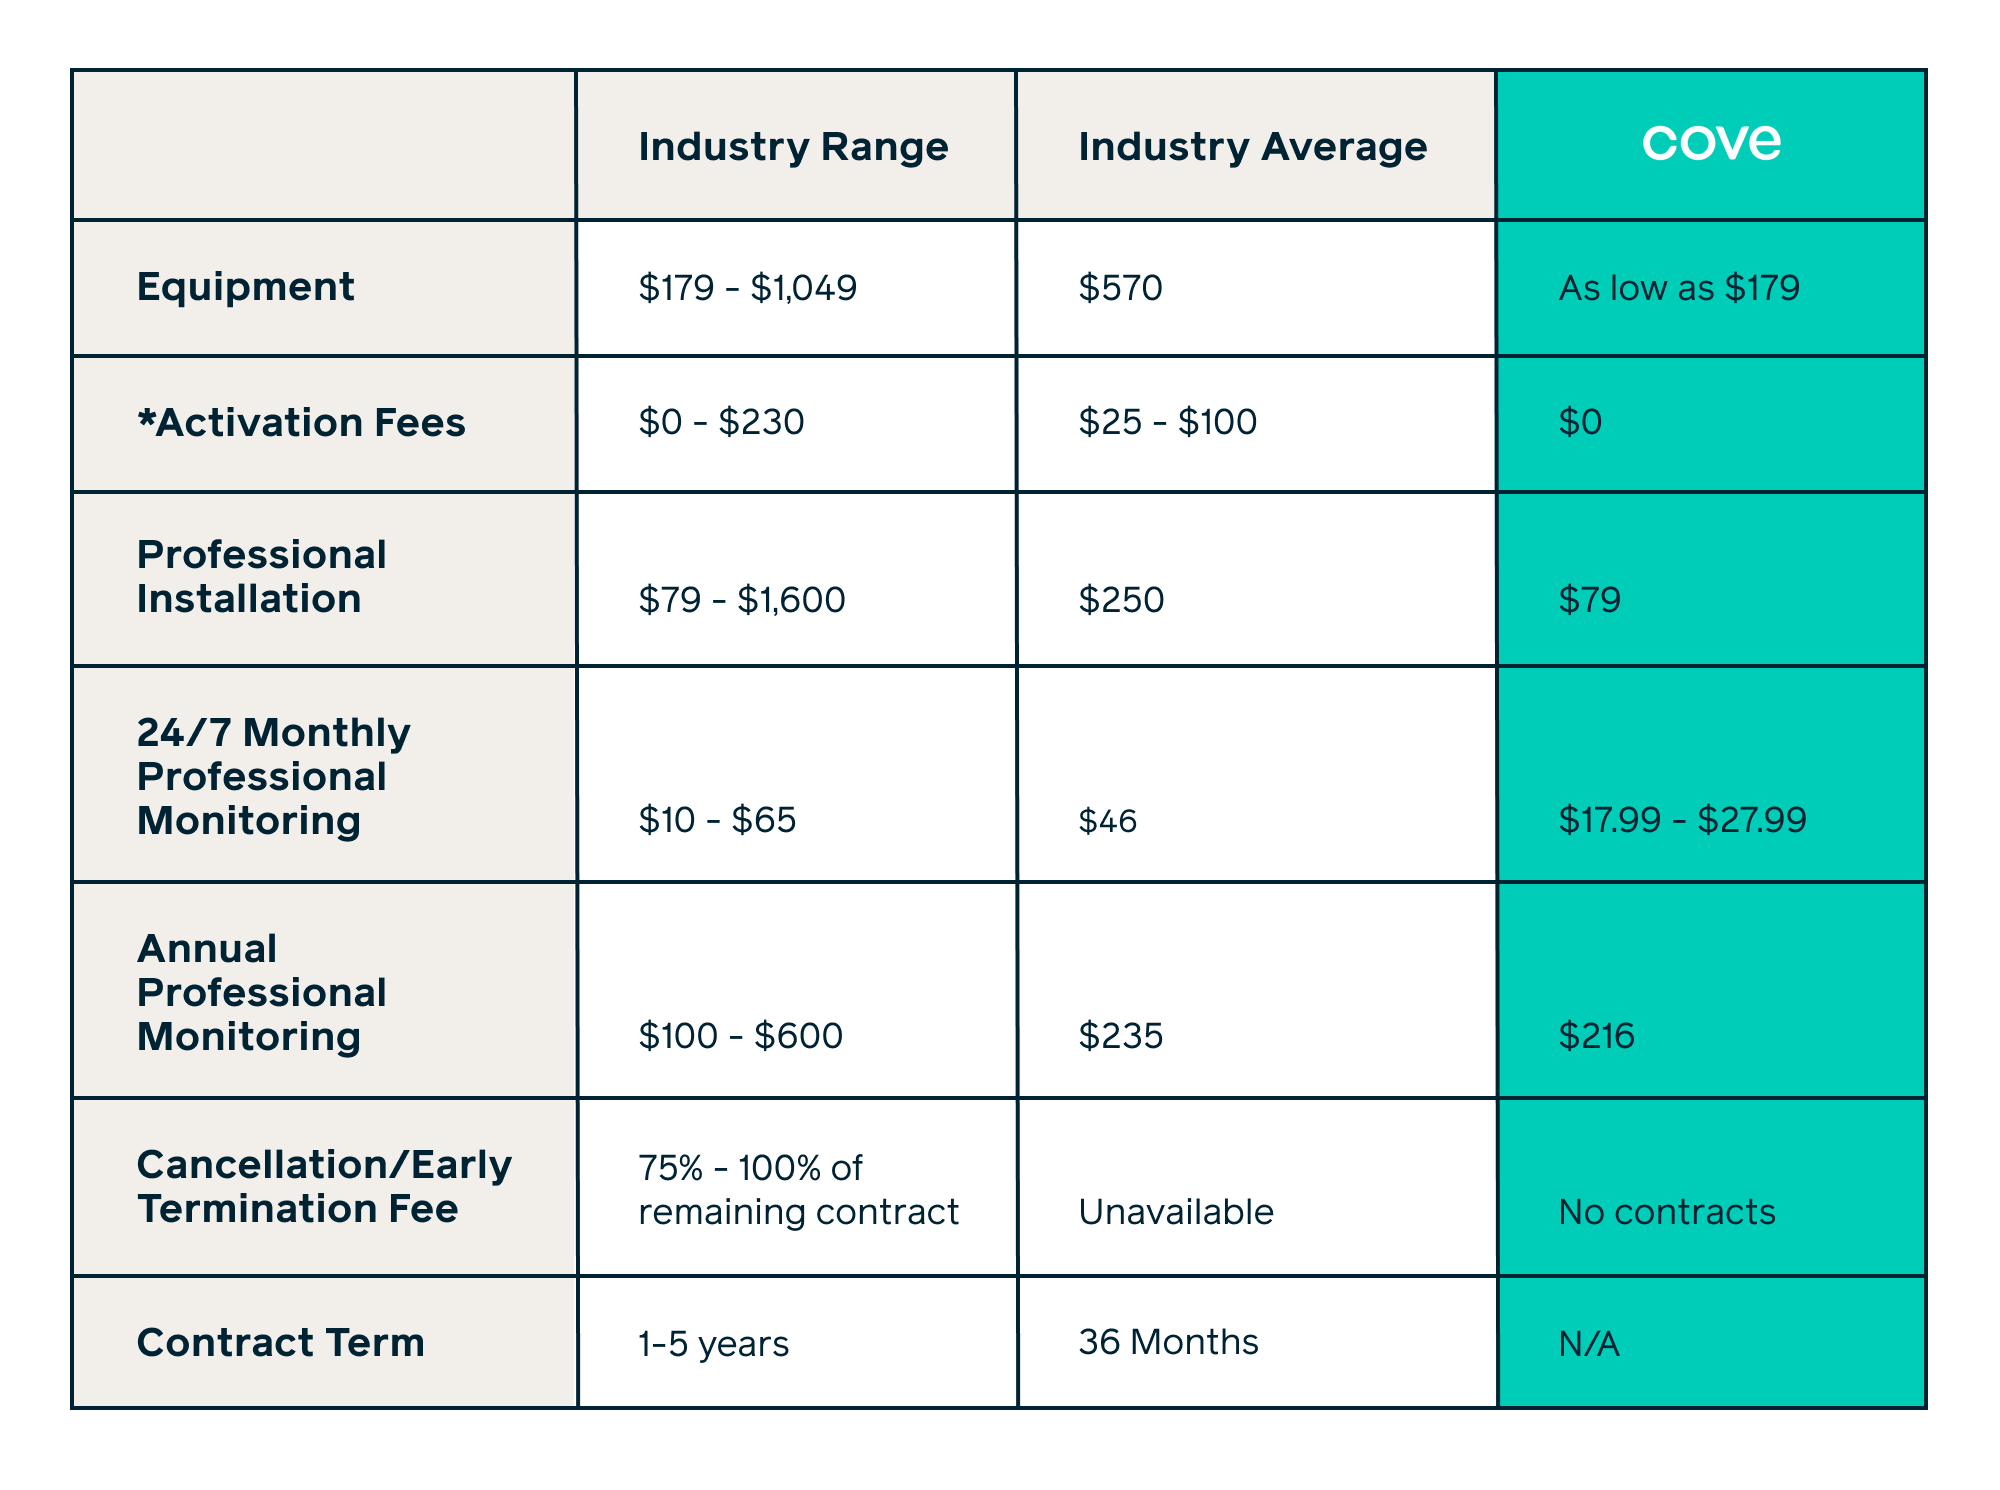 Industry and Cove costs